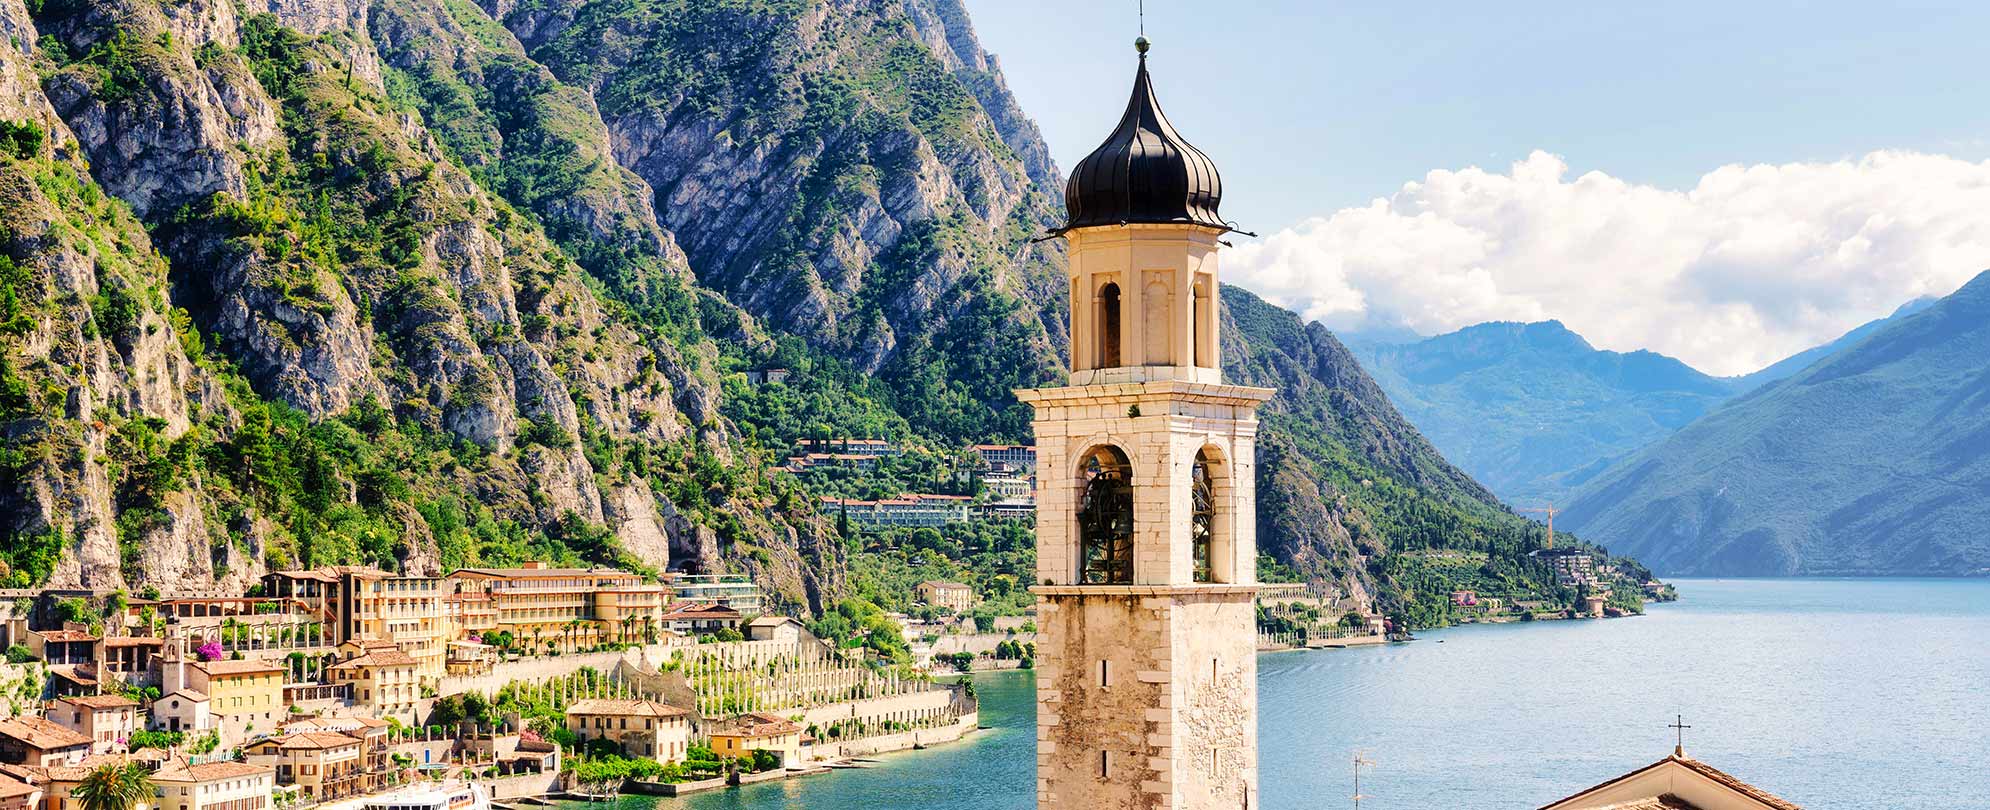 A bell tower in Limone sul Garda, a town in Lombard, Italy, with mountains, buildings, and Lake Garda in the background.